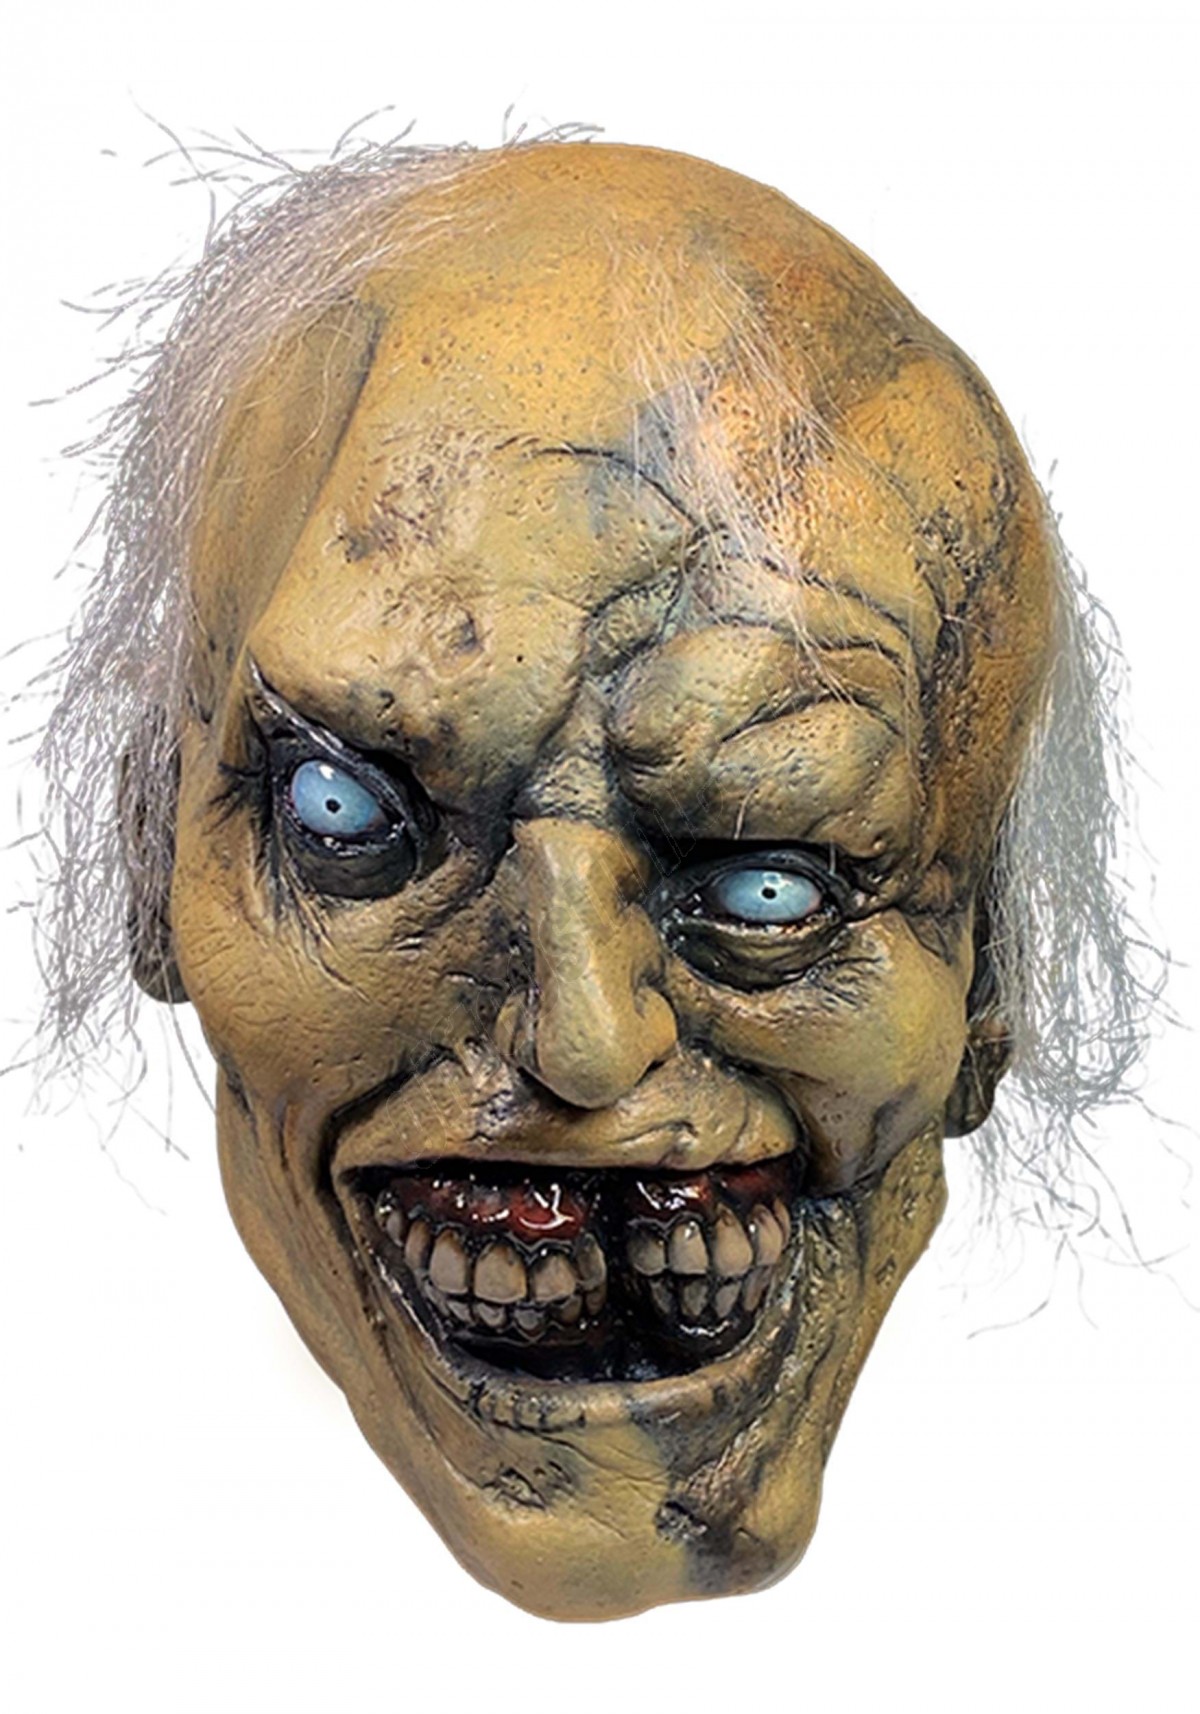 Jangly Man Mask from Scary Stories to Tell in the Dark Jangly Man Mask  Promotions - -0